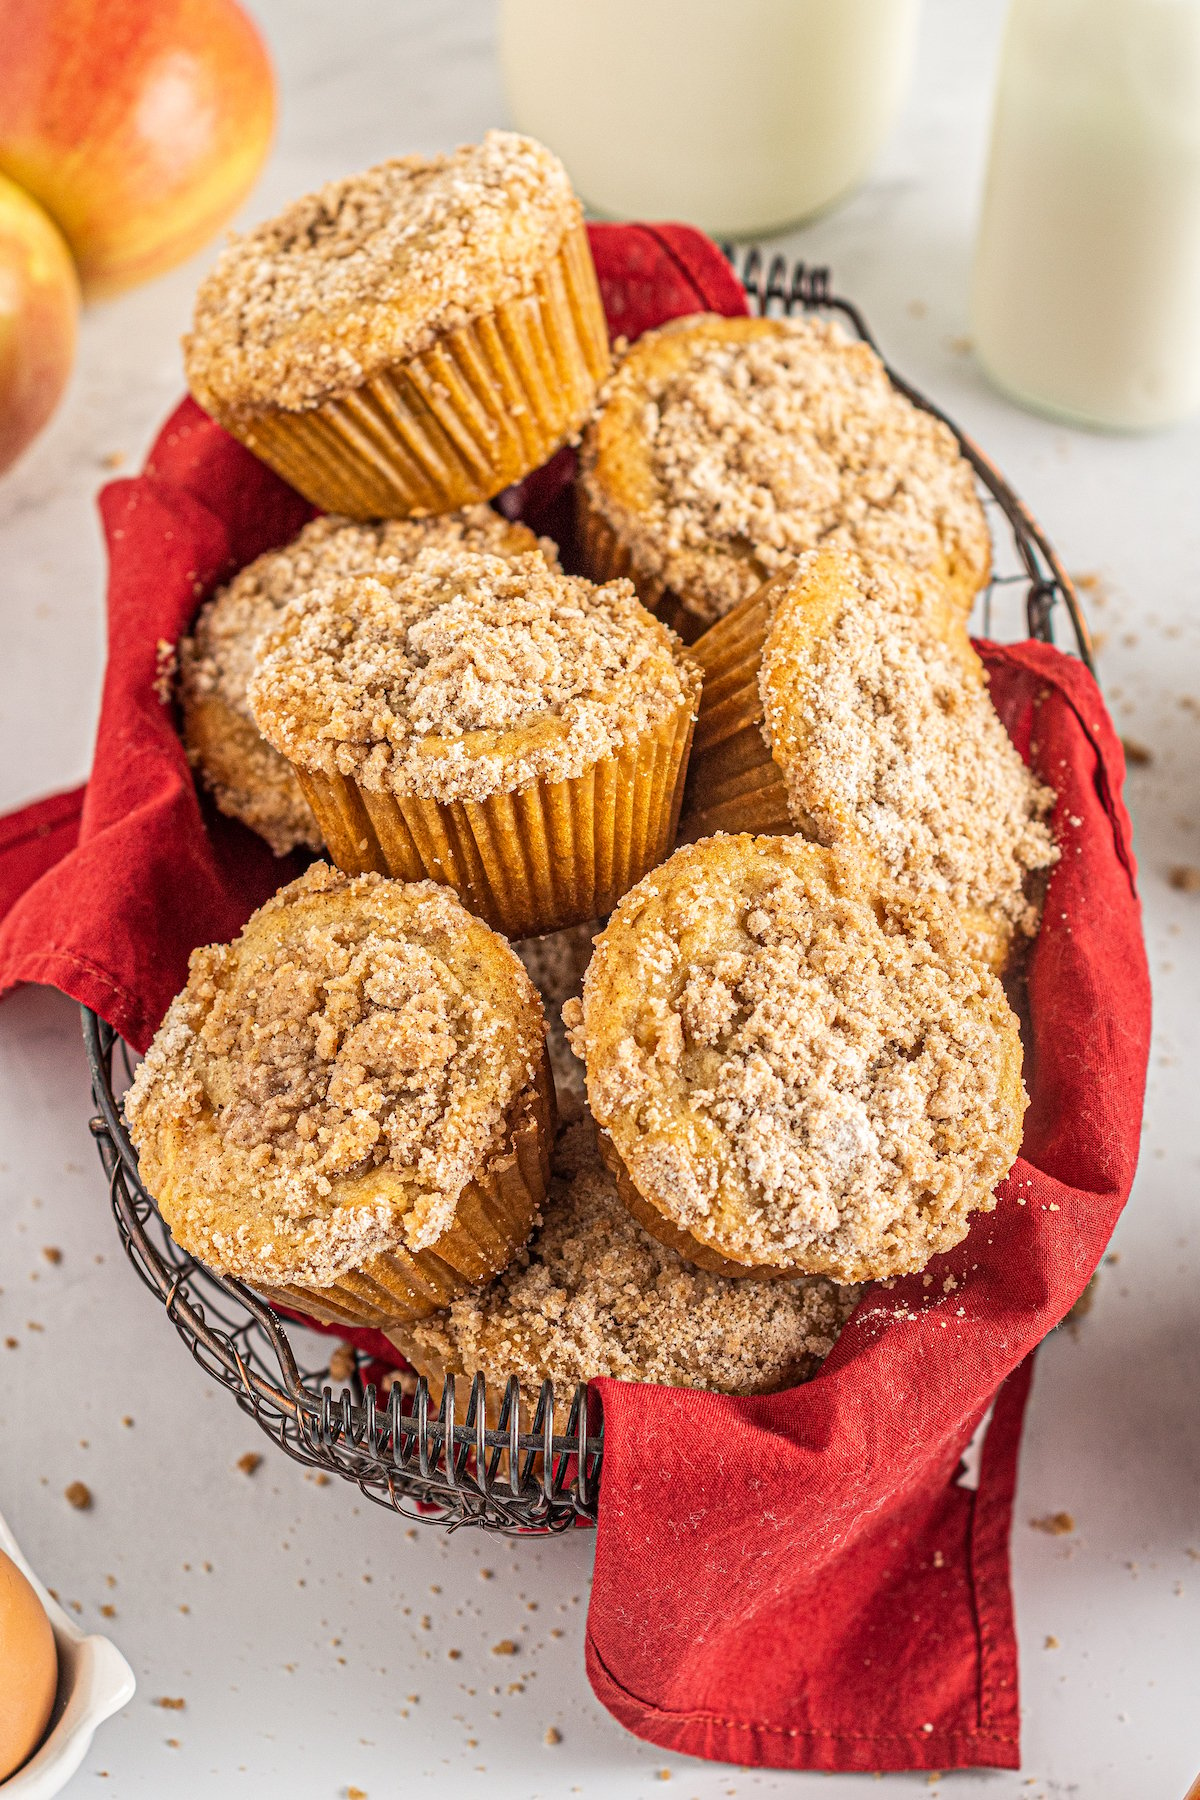 Crumb-topped muffins in a basket lined with a red tea towel.